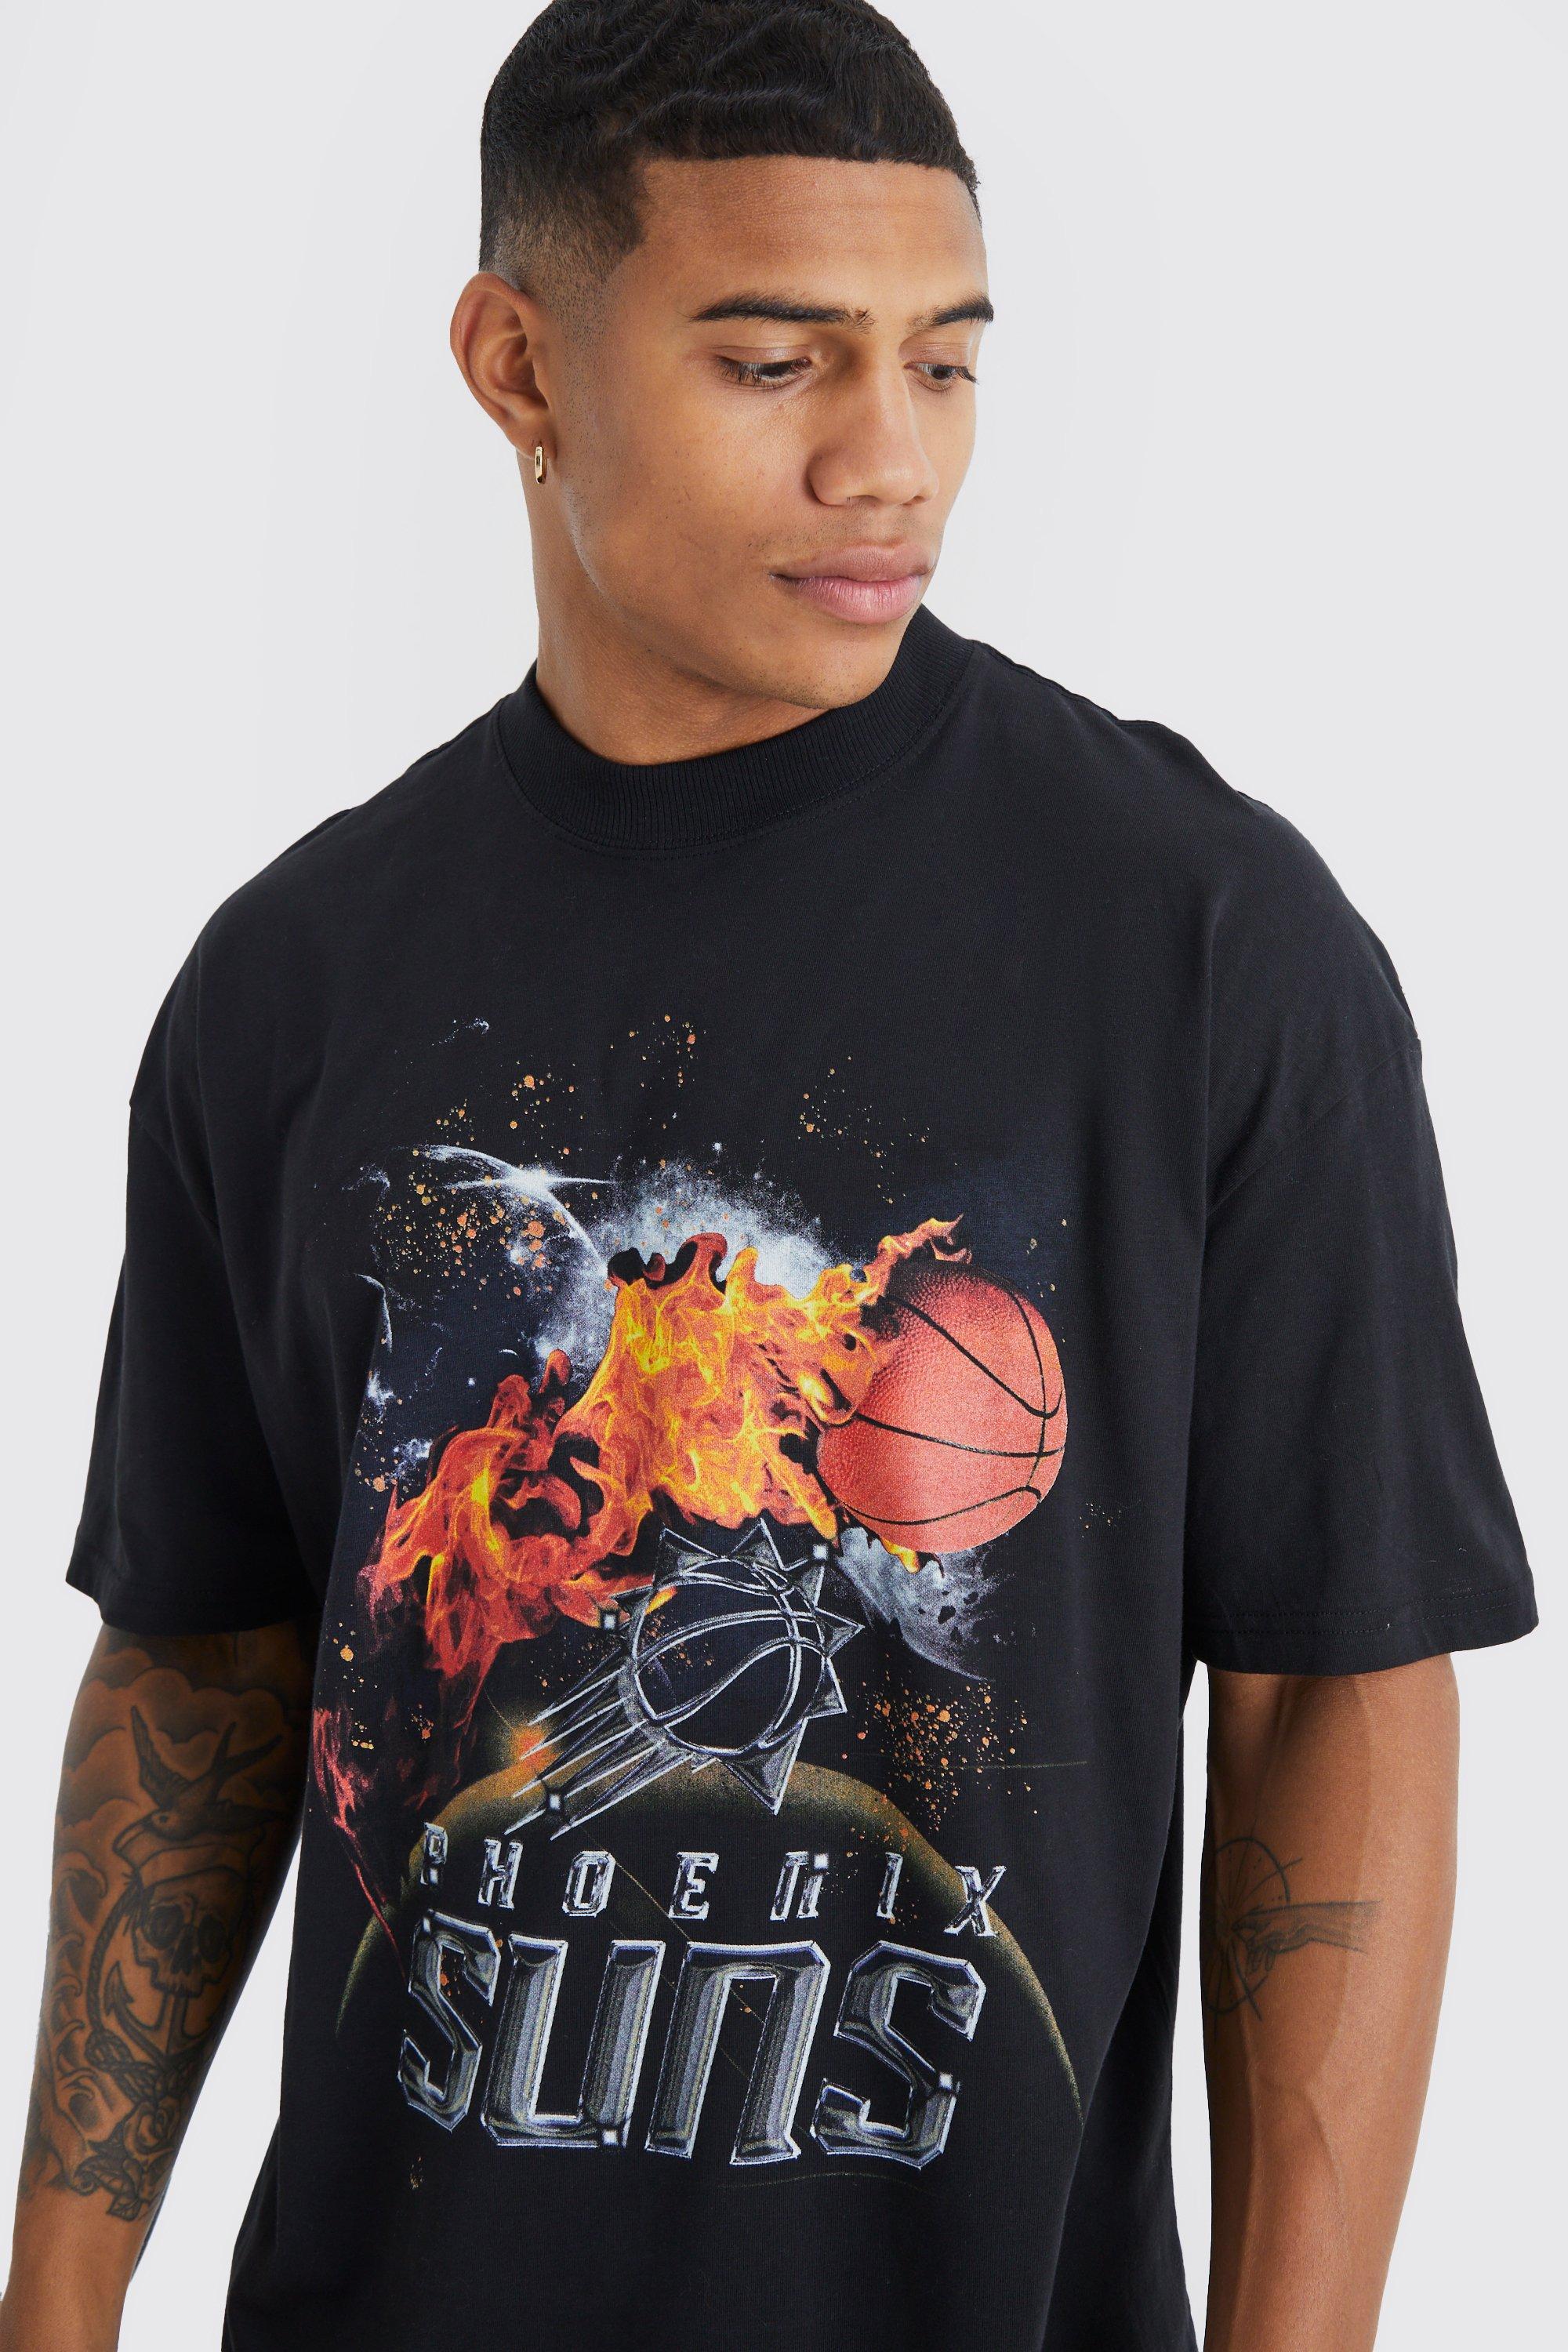 Need a new Phoenix Suns shirt or hat for under $10?